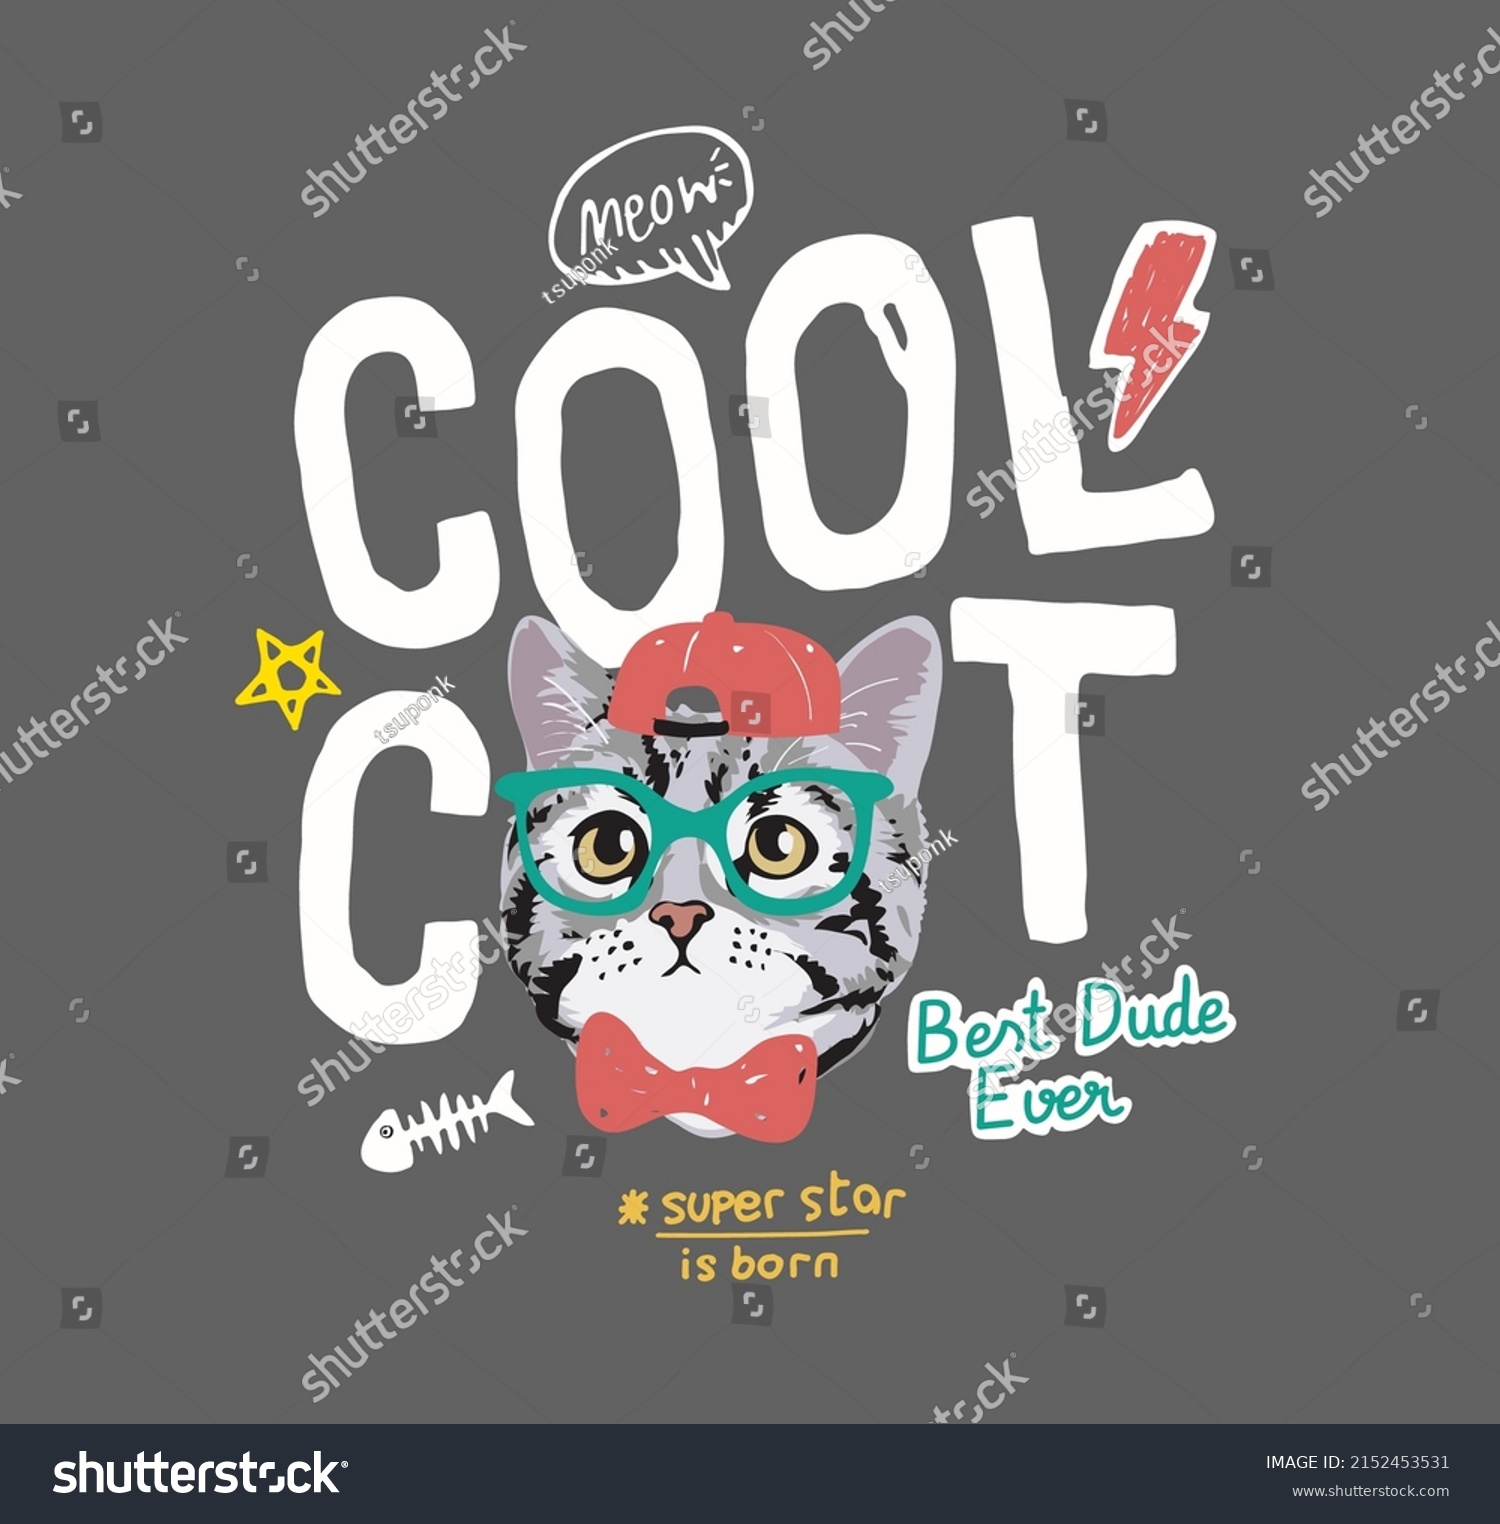 SVG of cool calt slogan with cute cartoon cat in glassess vector illustration svg